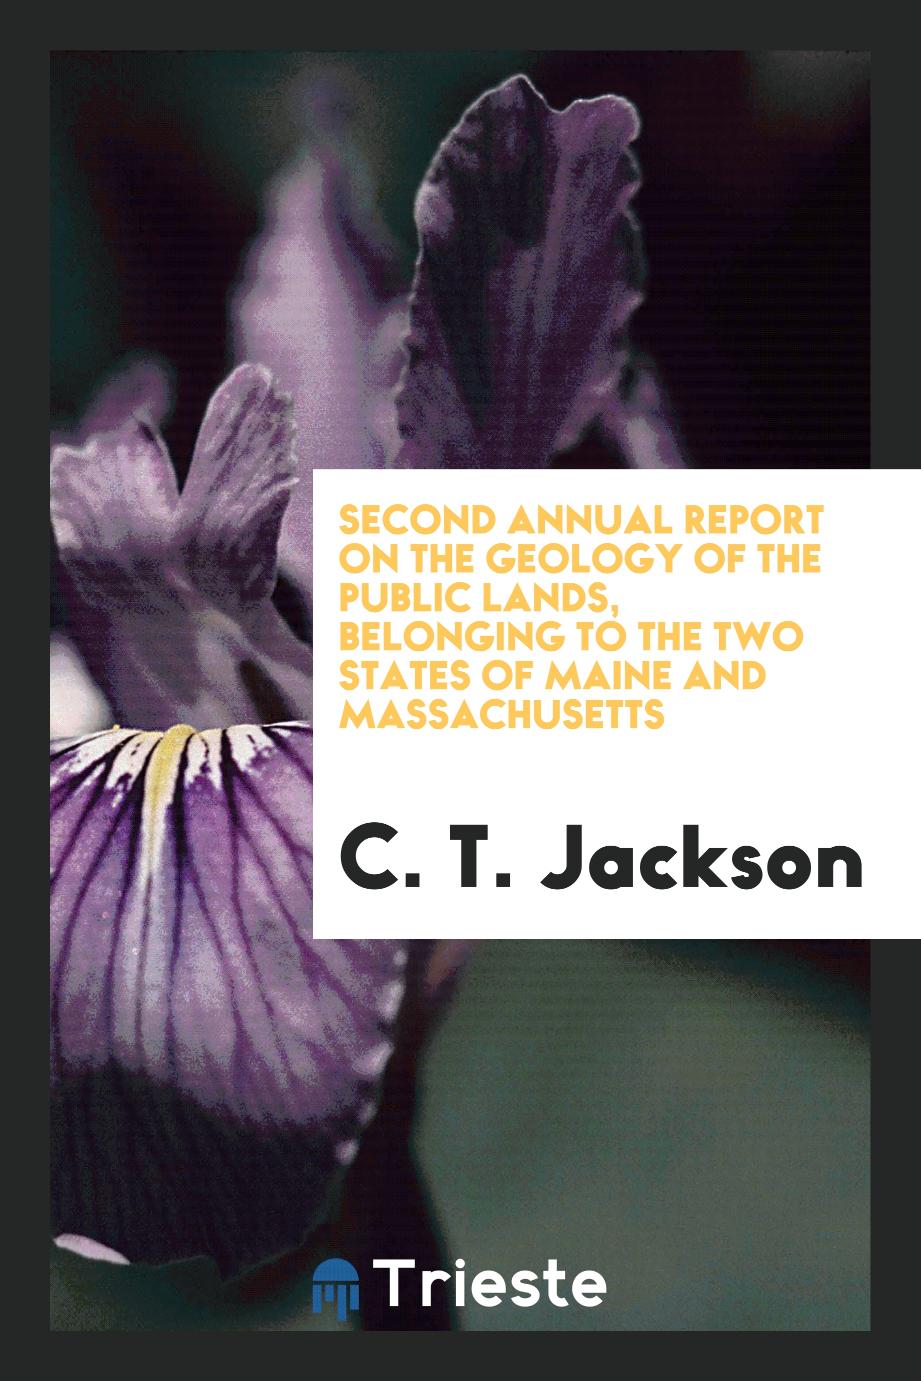 Second Annual Report on the Geology of the Public Lands, Belonging to the Two States of Maine and Massachusetts